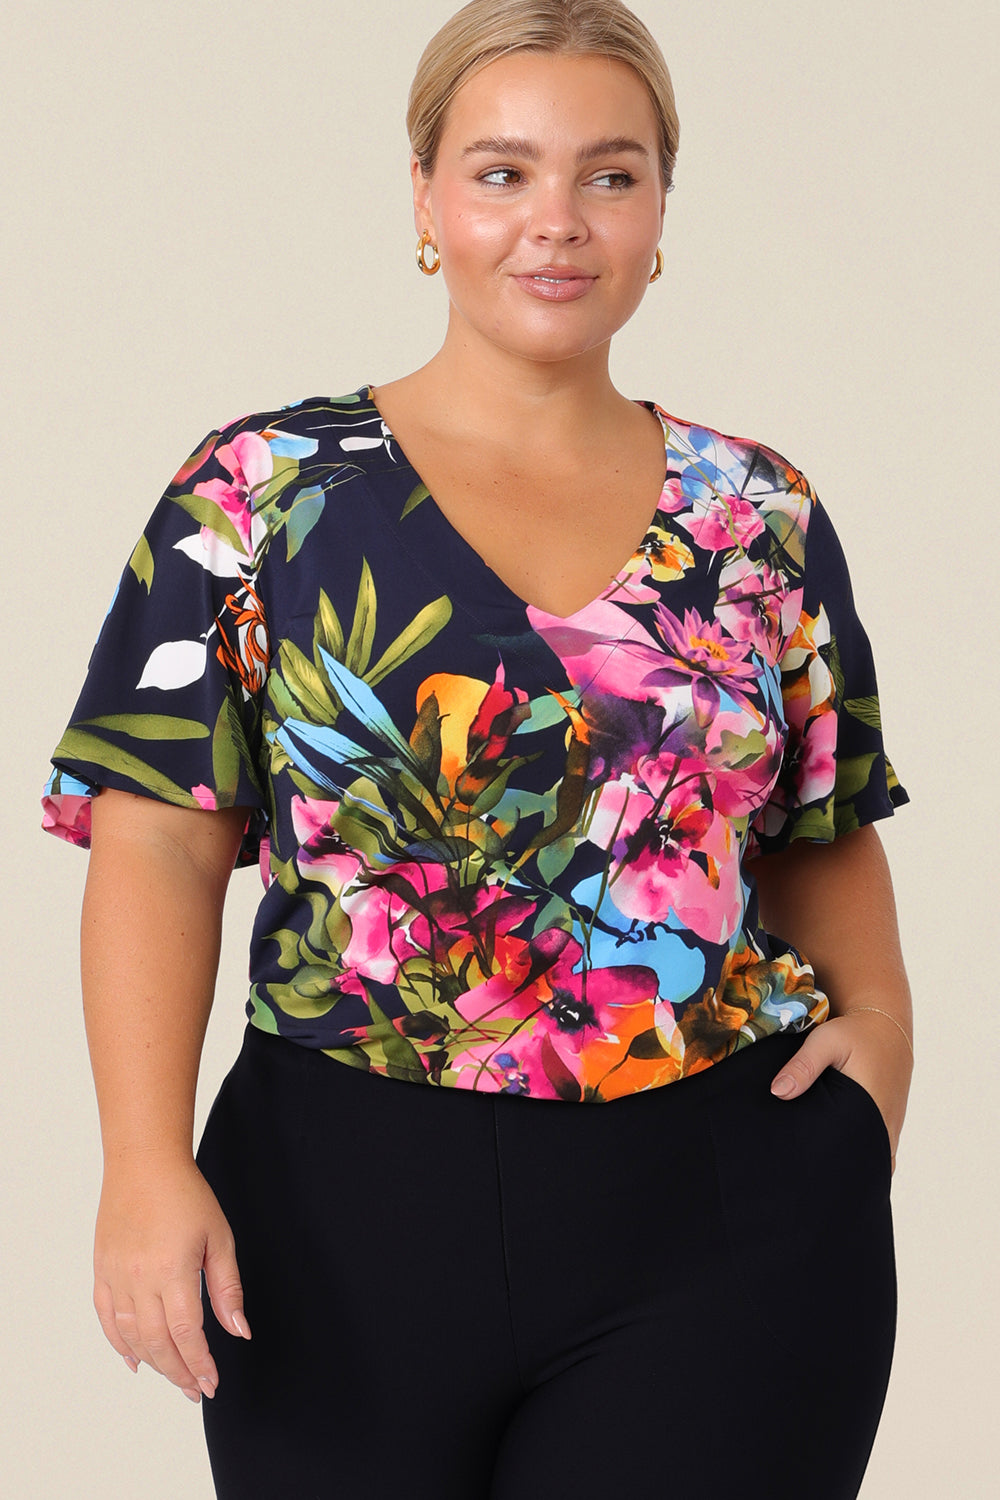 A plus size, size 14 woman wears a V-neck floral top with short flutter sleeves. Made from dry-touch jersey, this top is comfortable for everyday style. Designed and made in Australia for petite to plus size women.